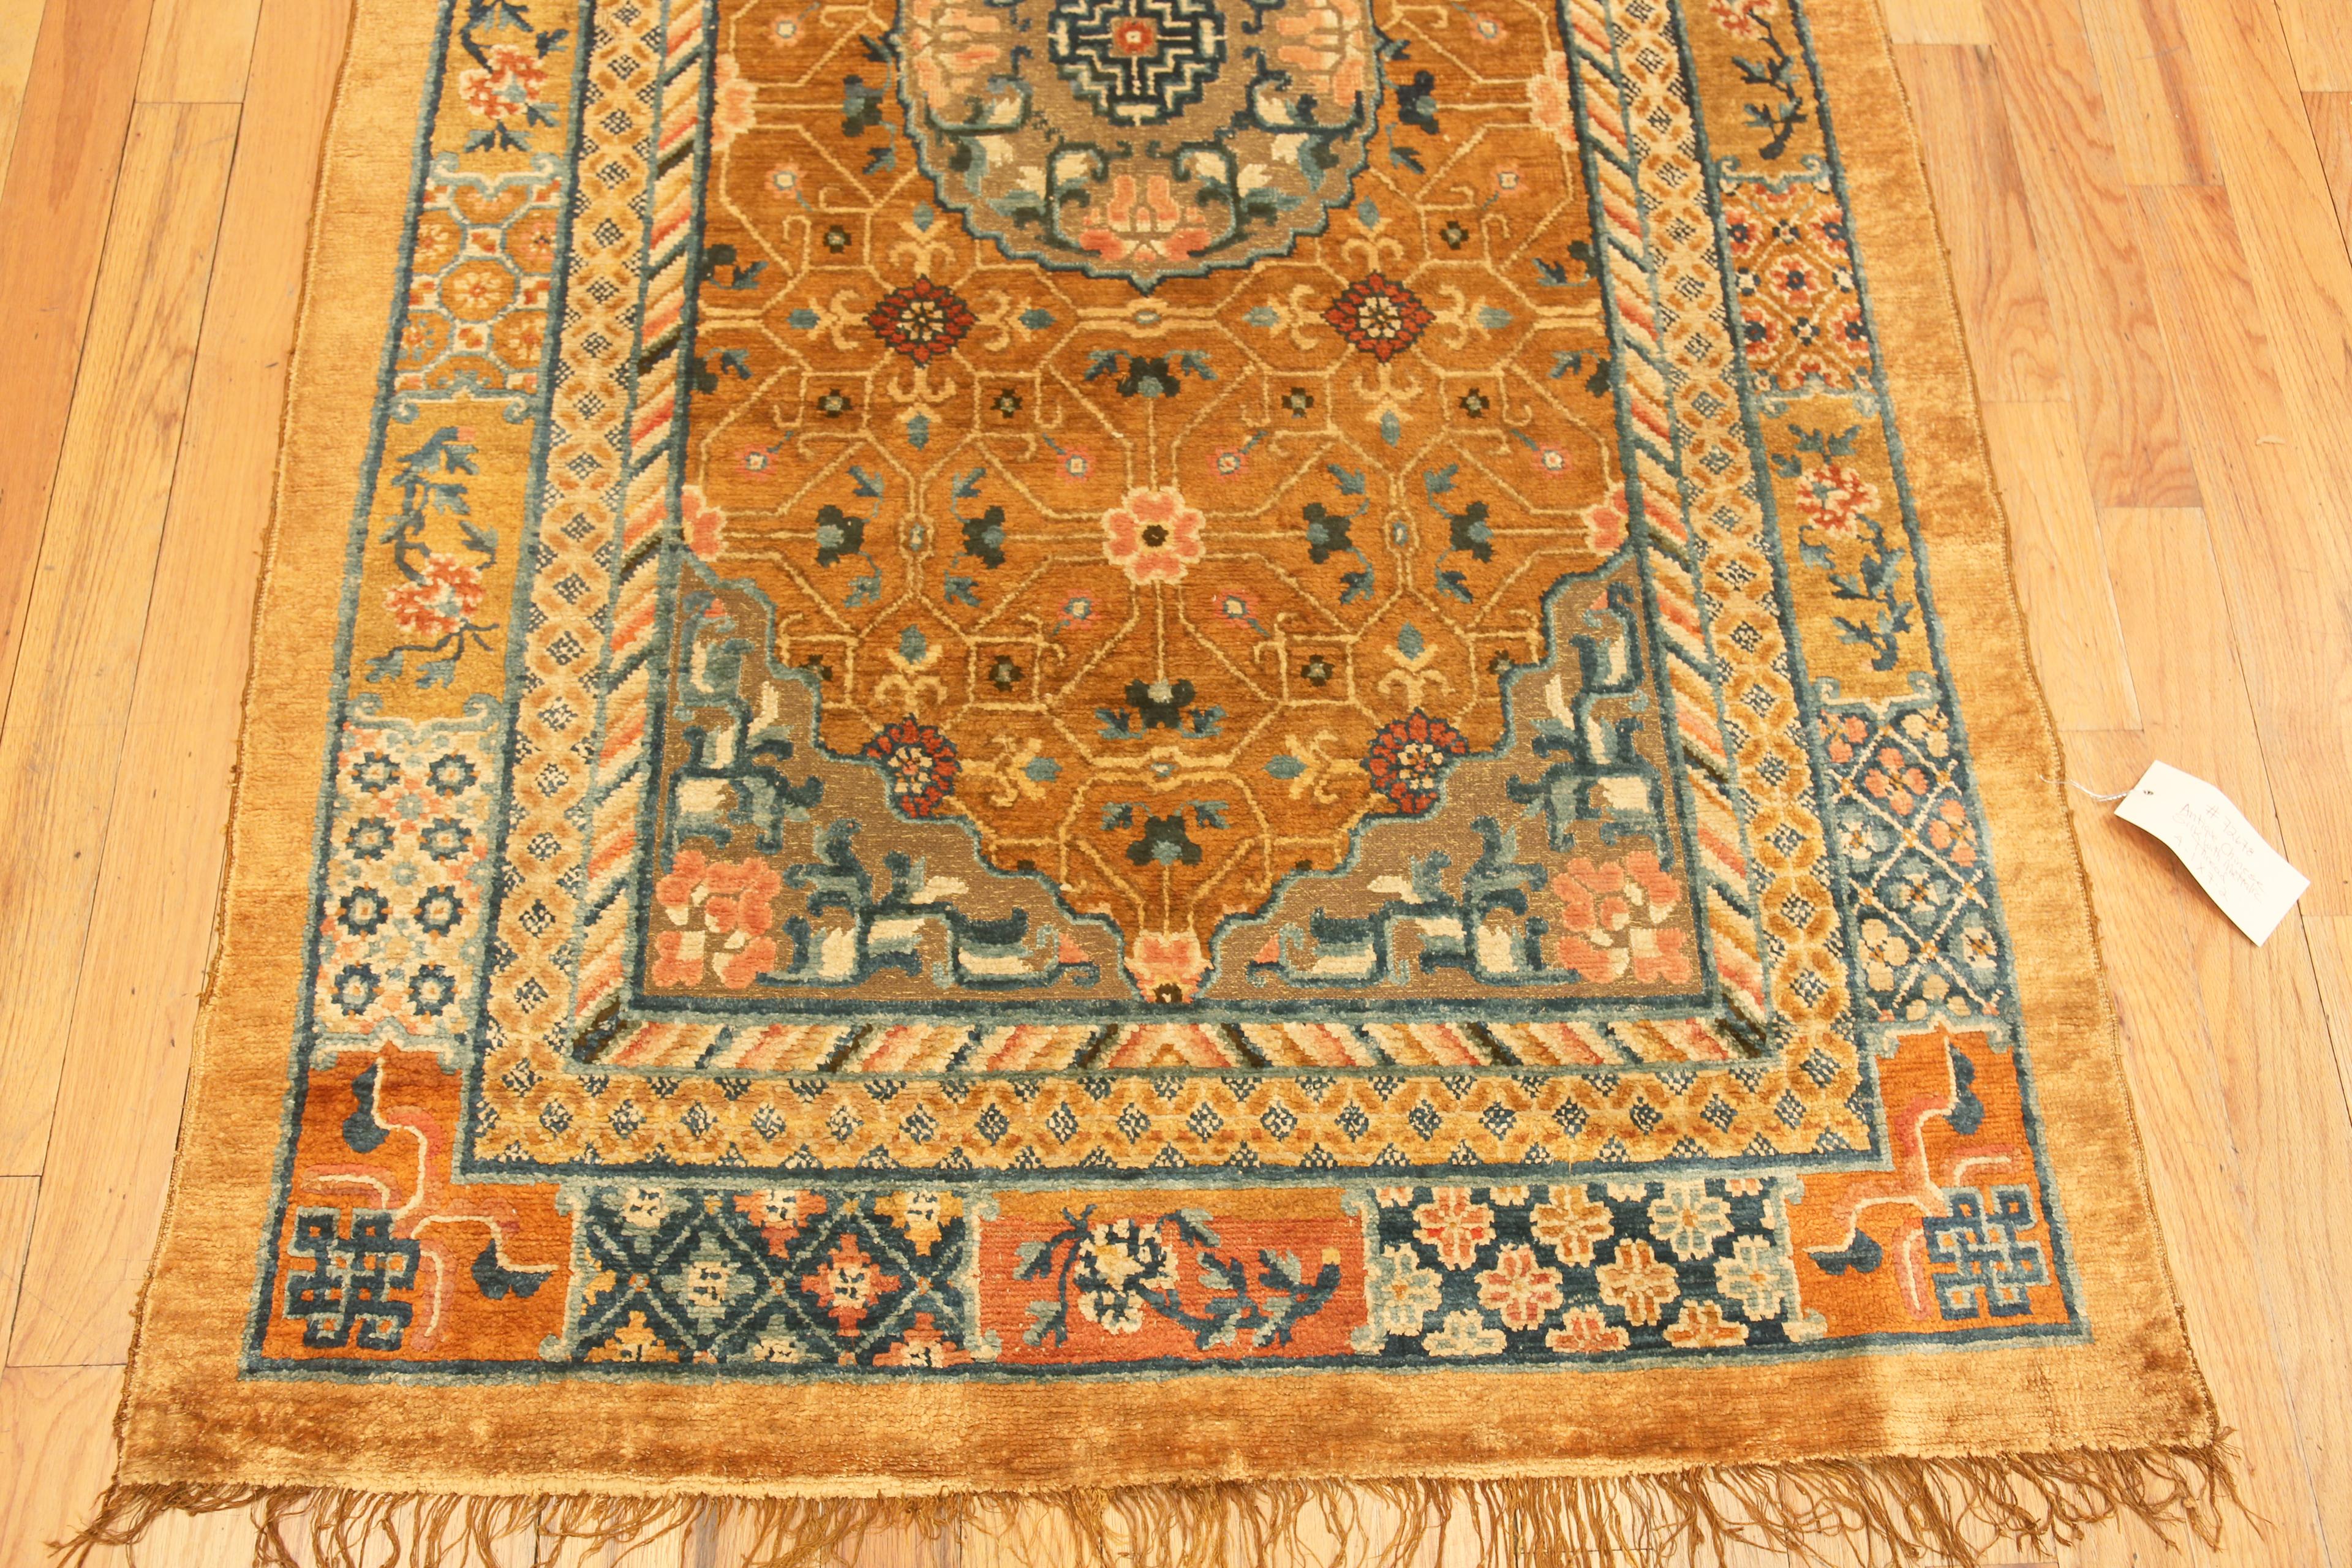 Collectible Antique Mid 19th Century Chinese Metallic and Silk Pile Rug 4' x 7' For Sale 2